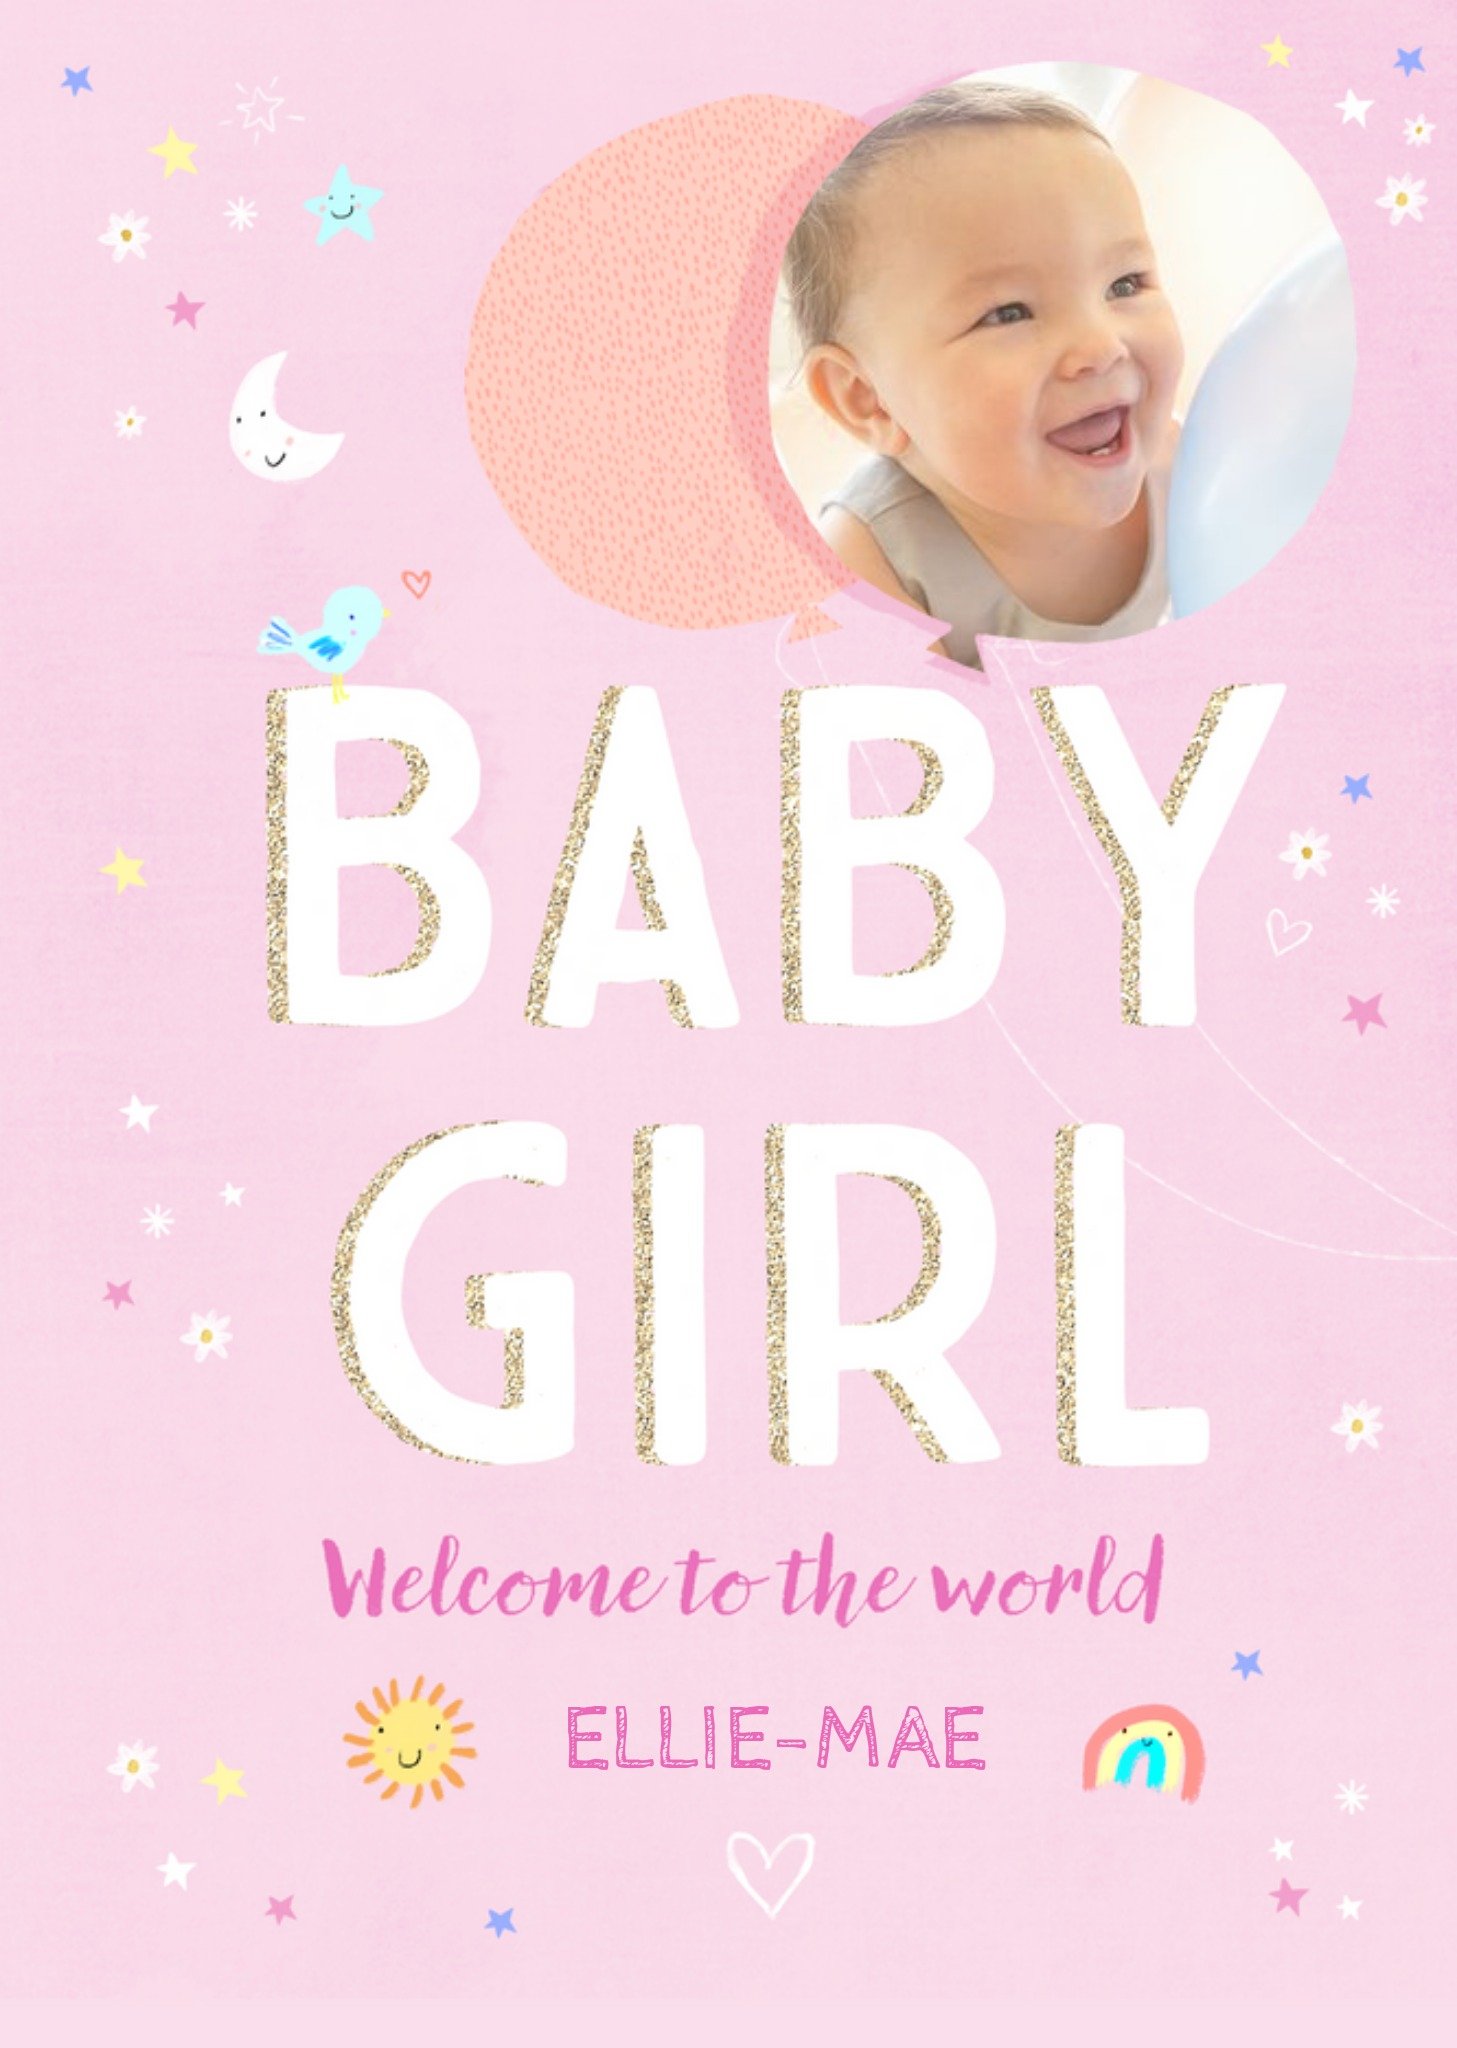 Moonpig Typographic Illustrated Welcome To The World New Baby Girl Photo Upload Card, Large